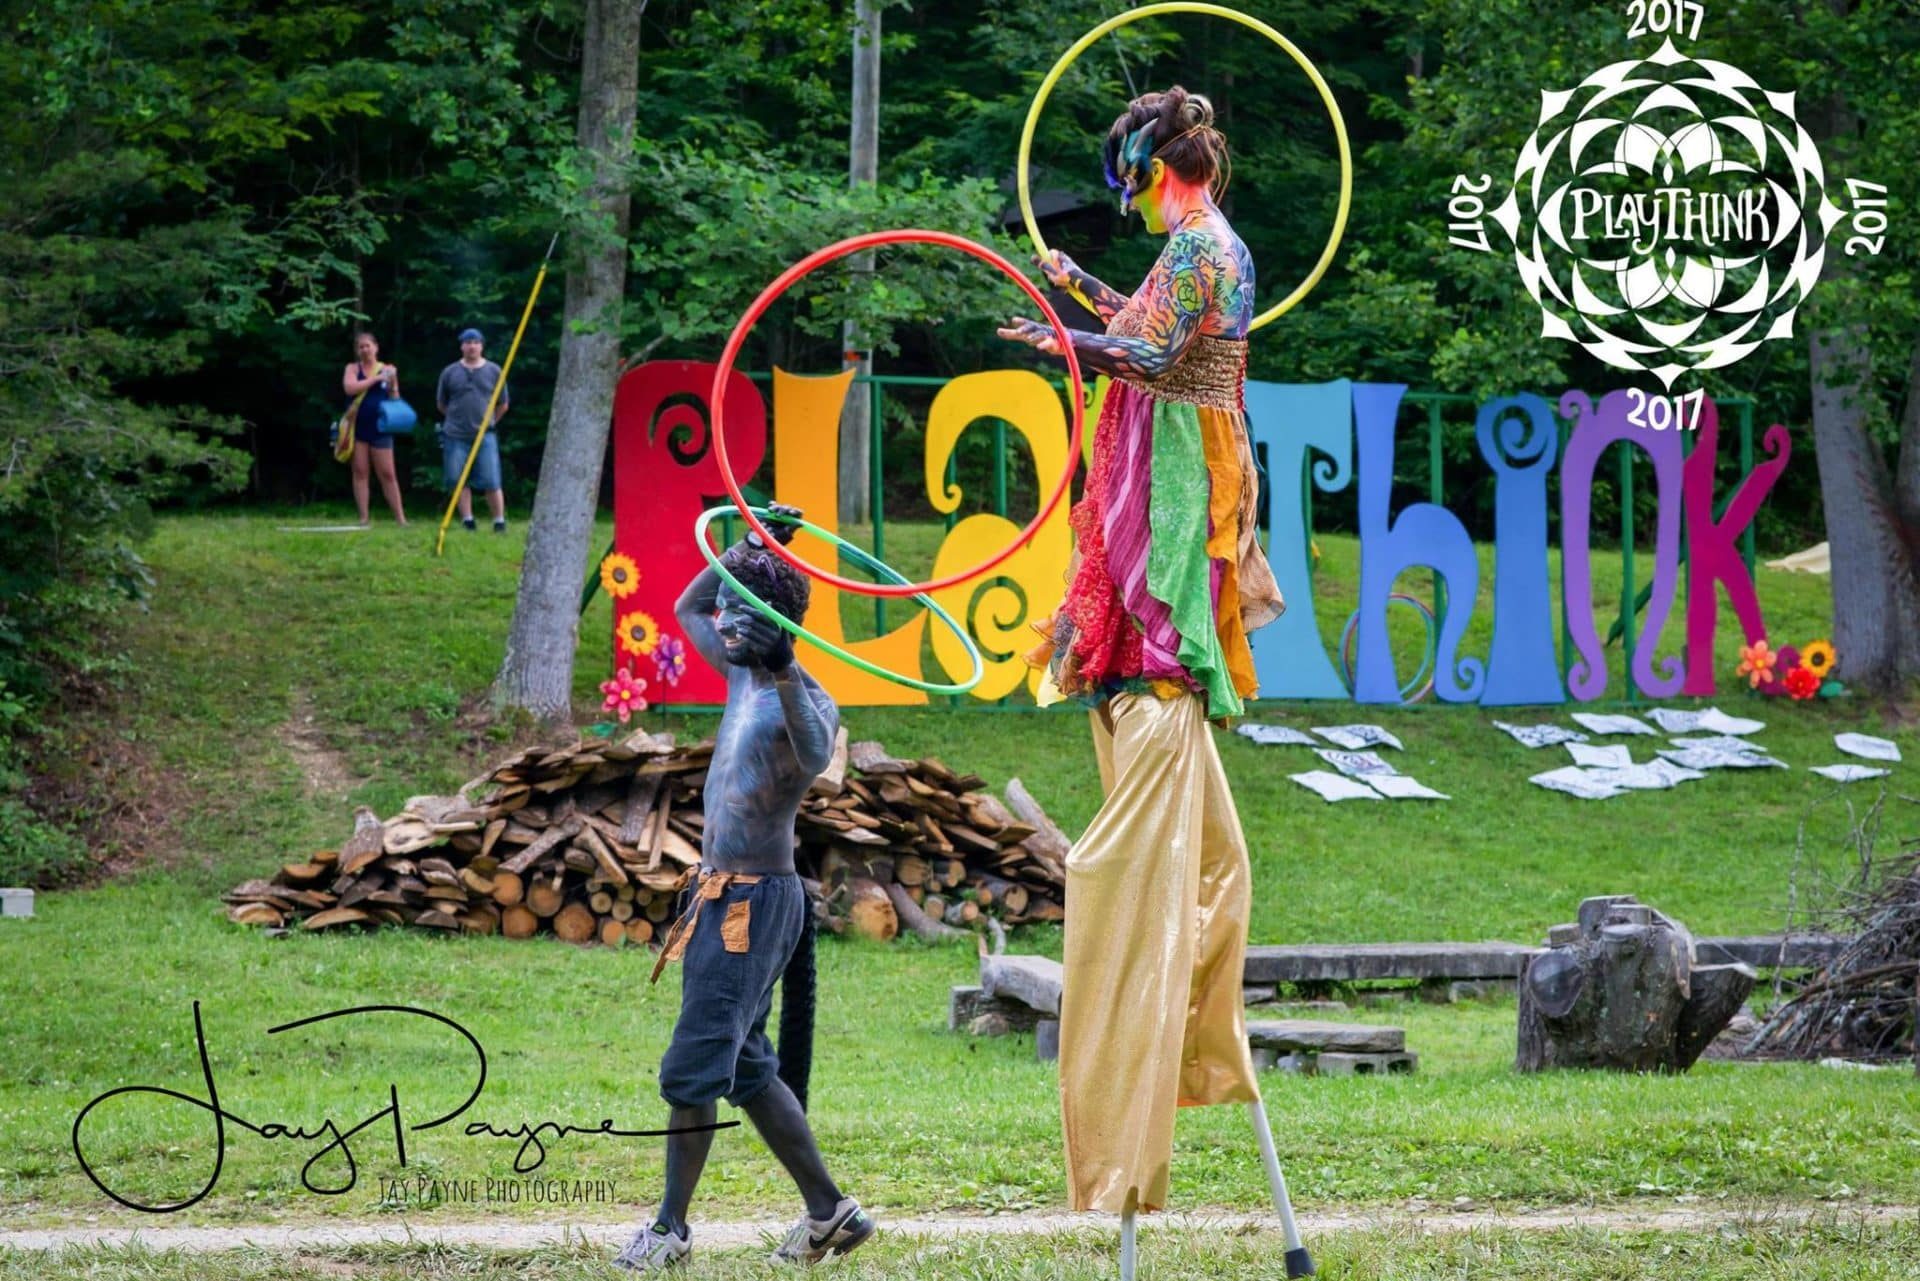 About PlayThink - Performers stilt walking and hooping at PlayThink 2017